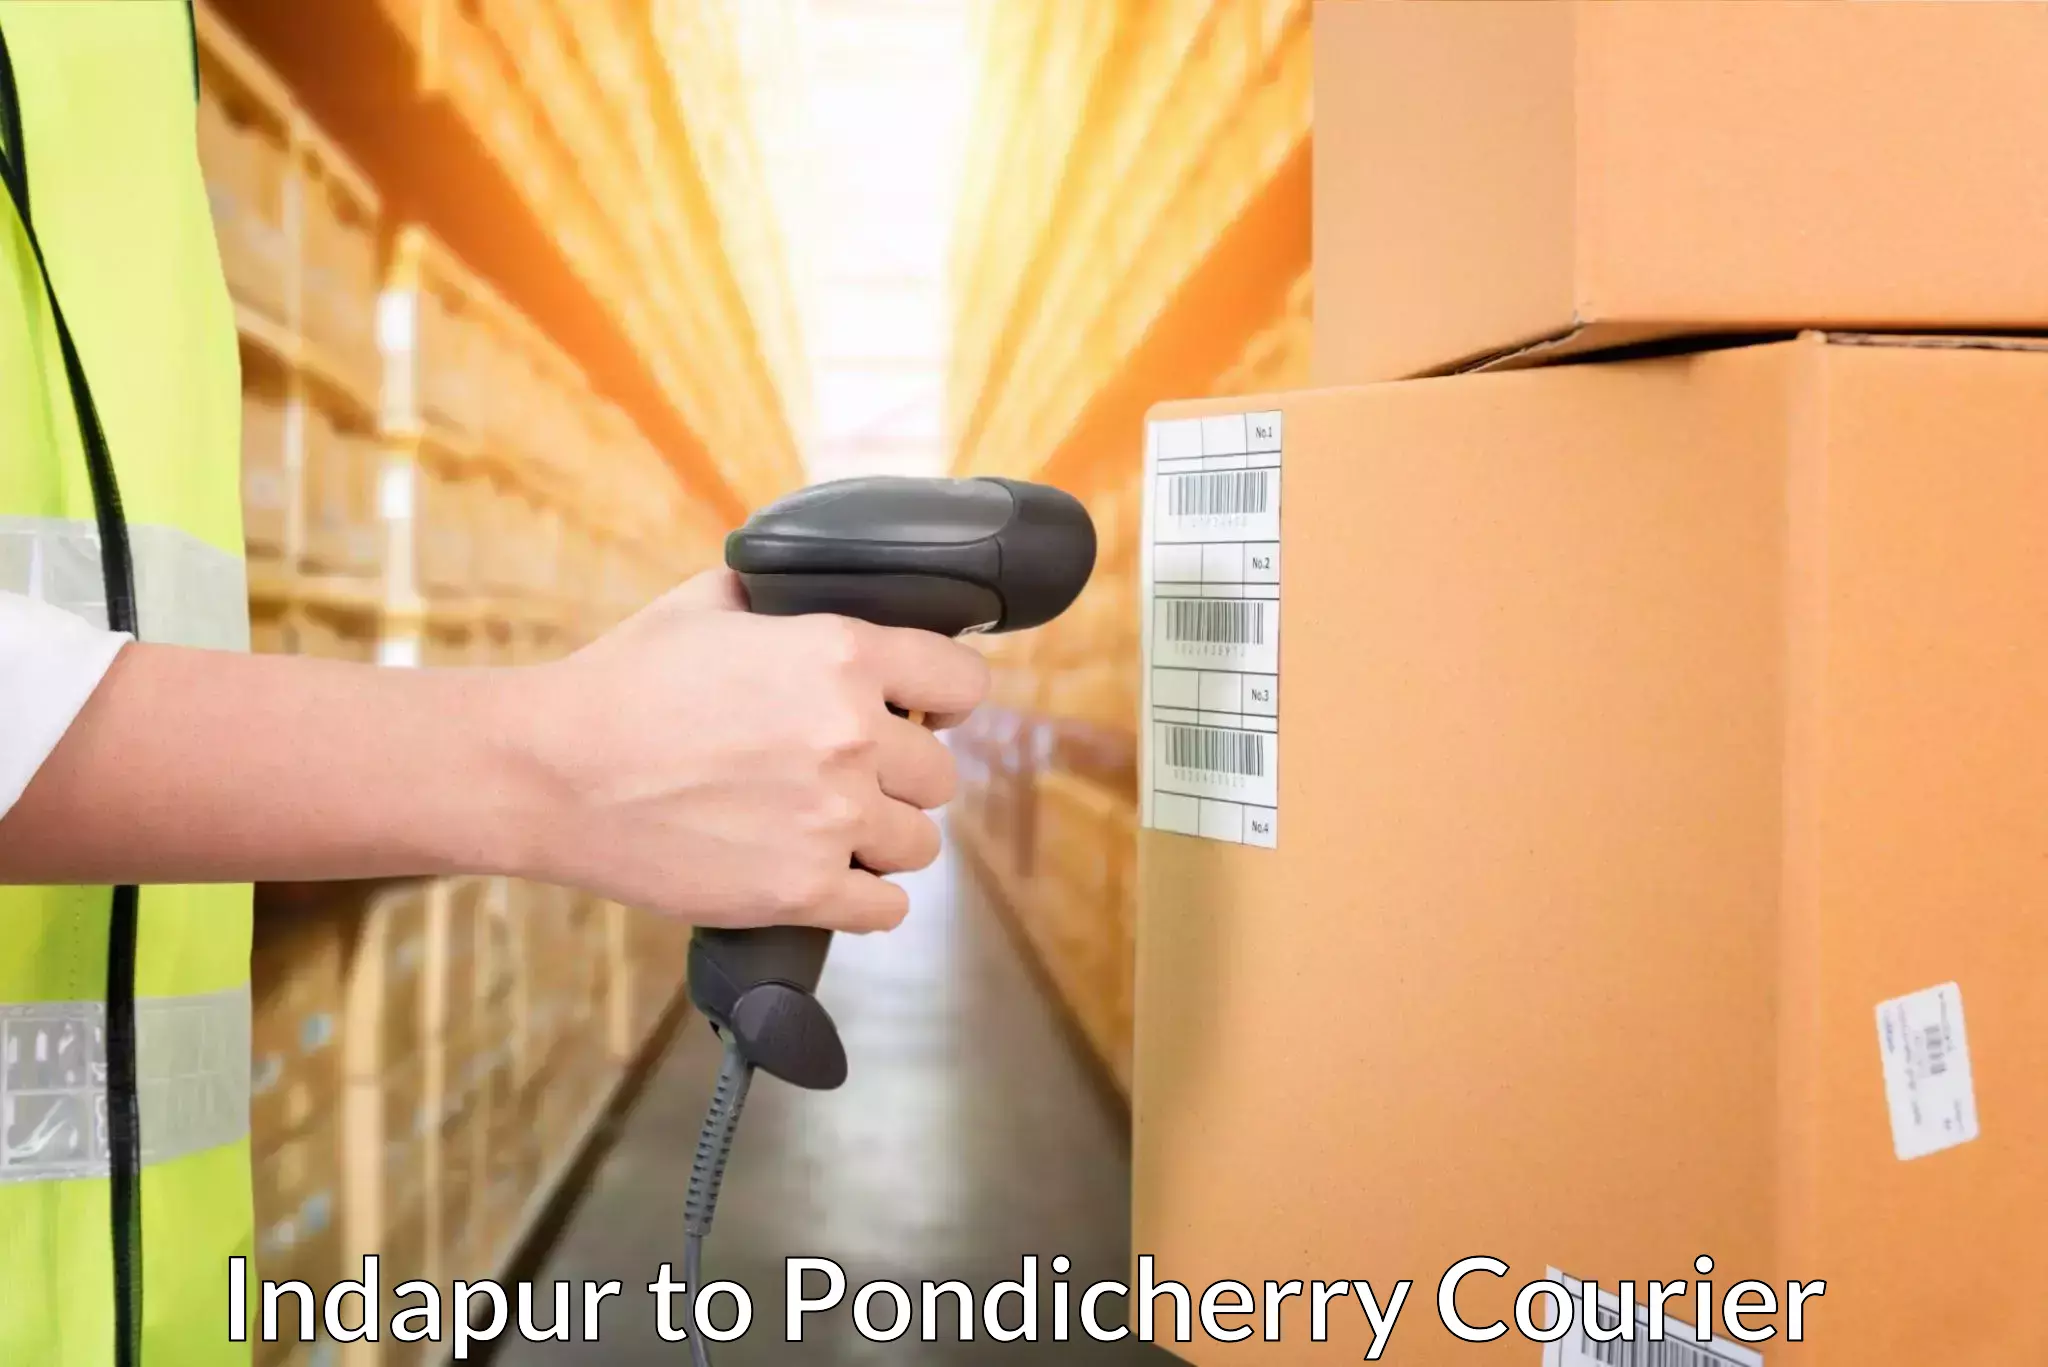 Express delivery capabilities Indapur to Pondicherry